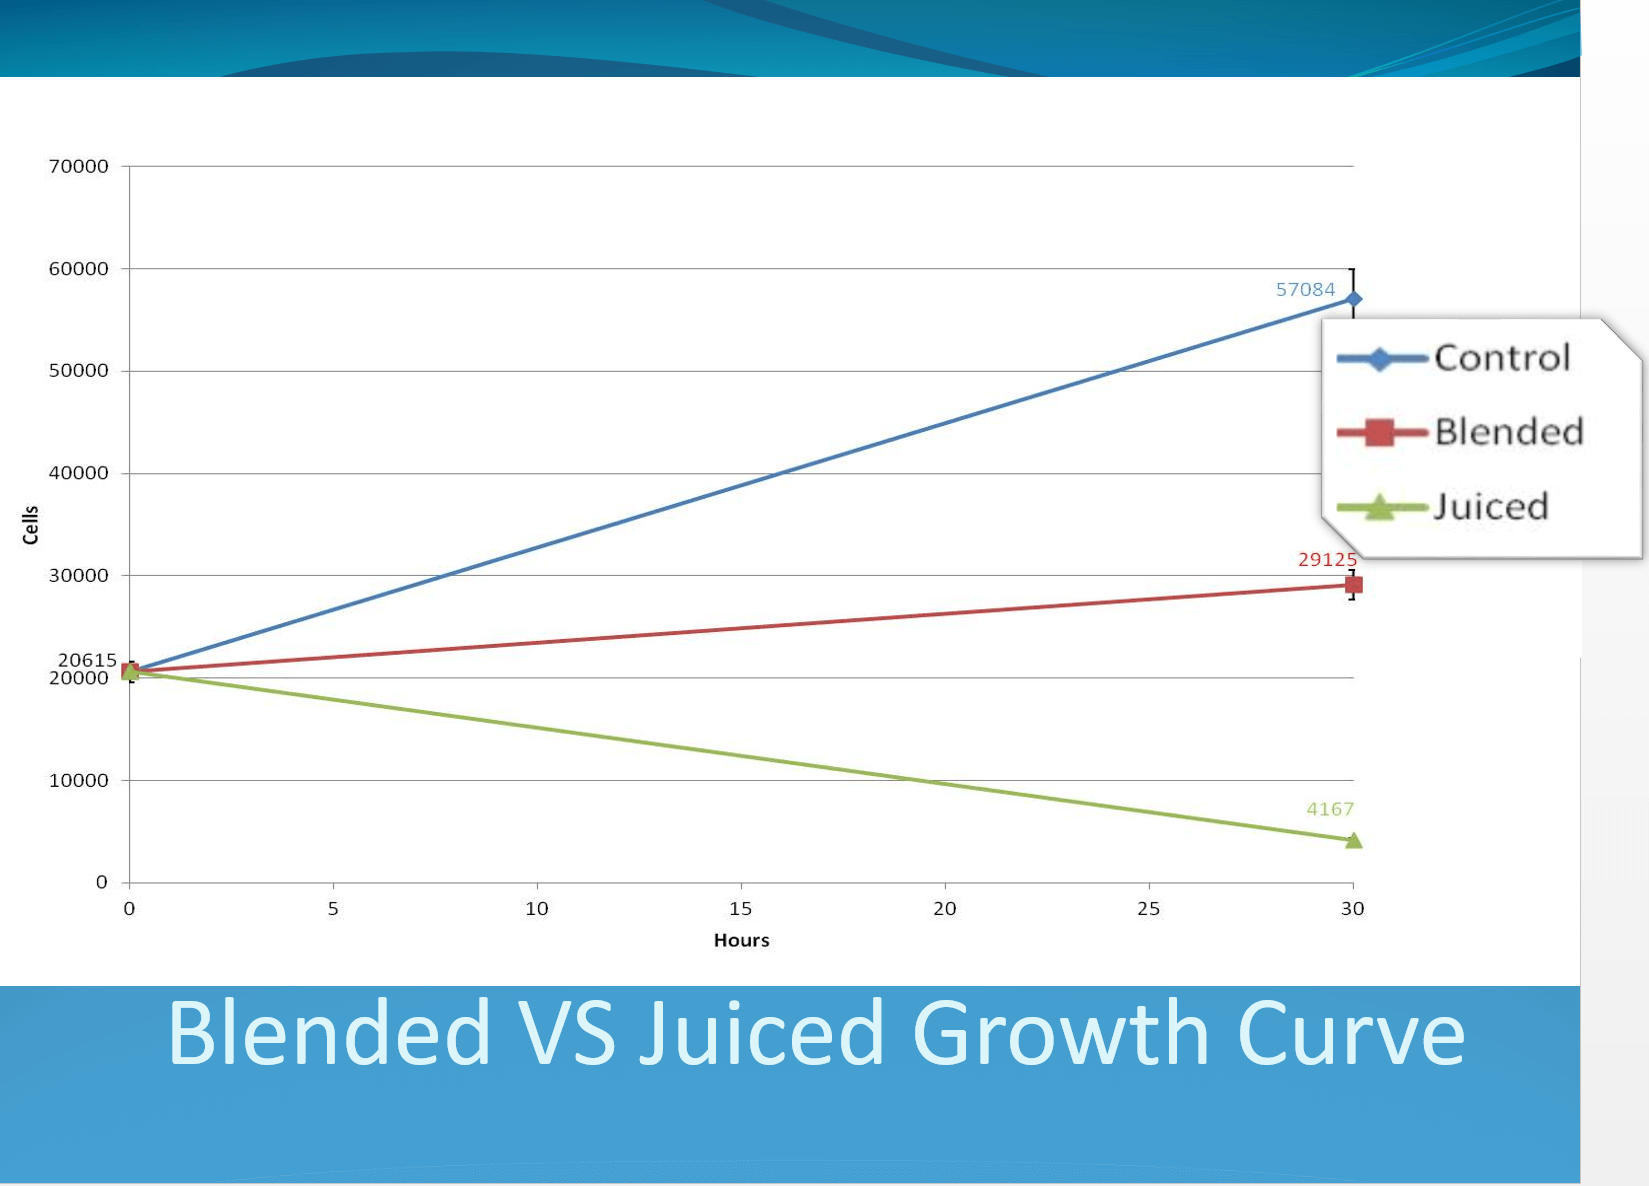 Powerpoint slide comparing the growth of blended and juiced kale that occurs in hours presented by Bilal Qizilbash at UFS Yale 2015.